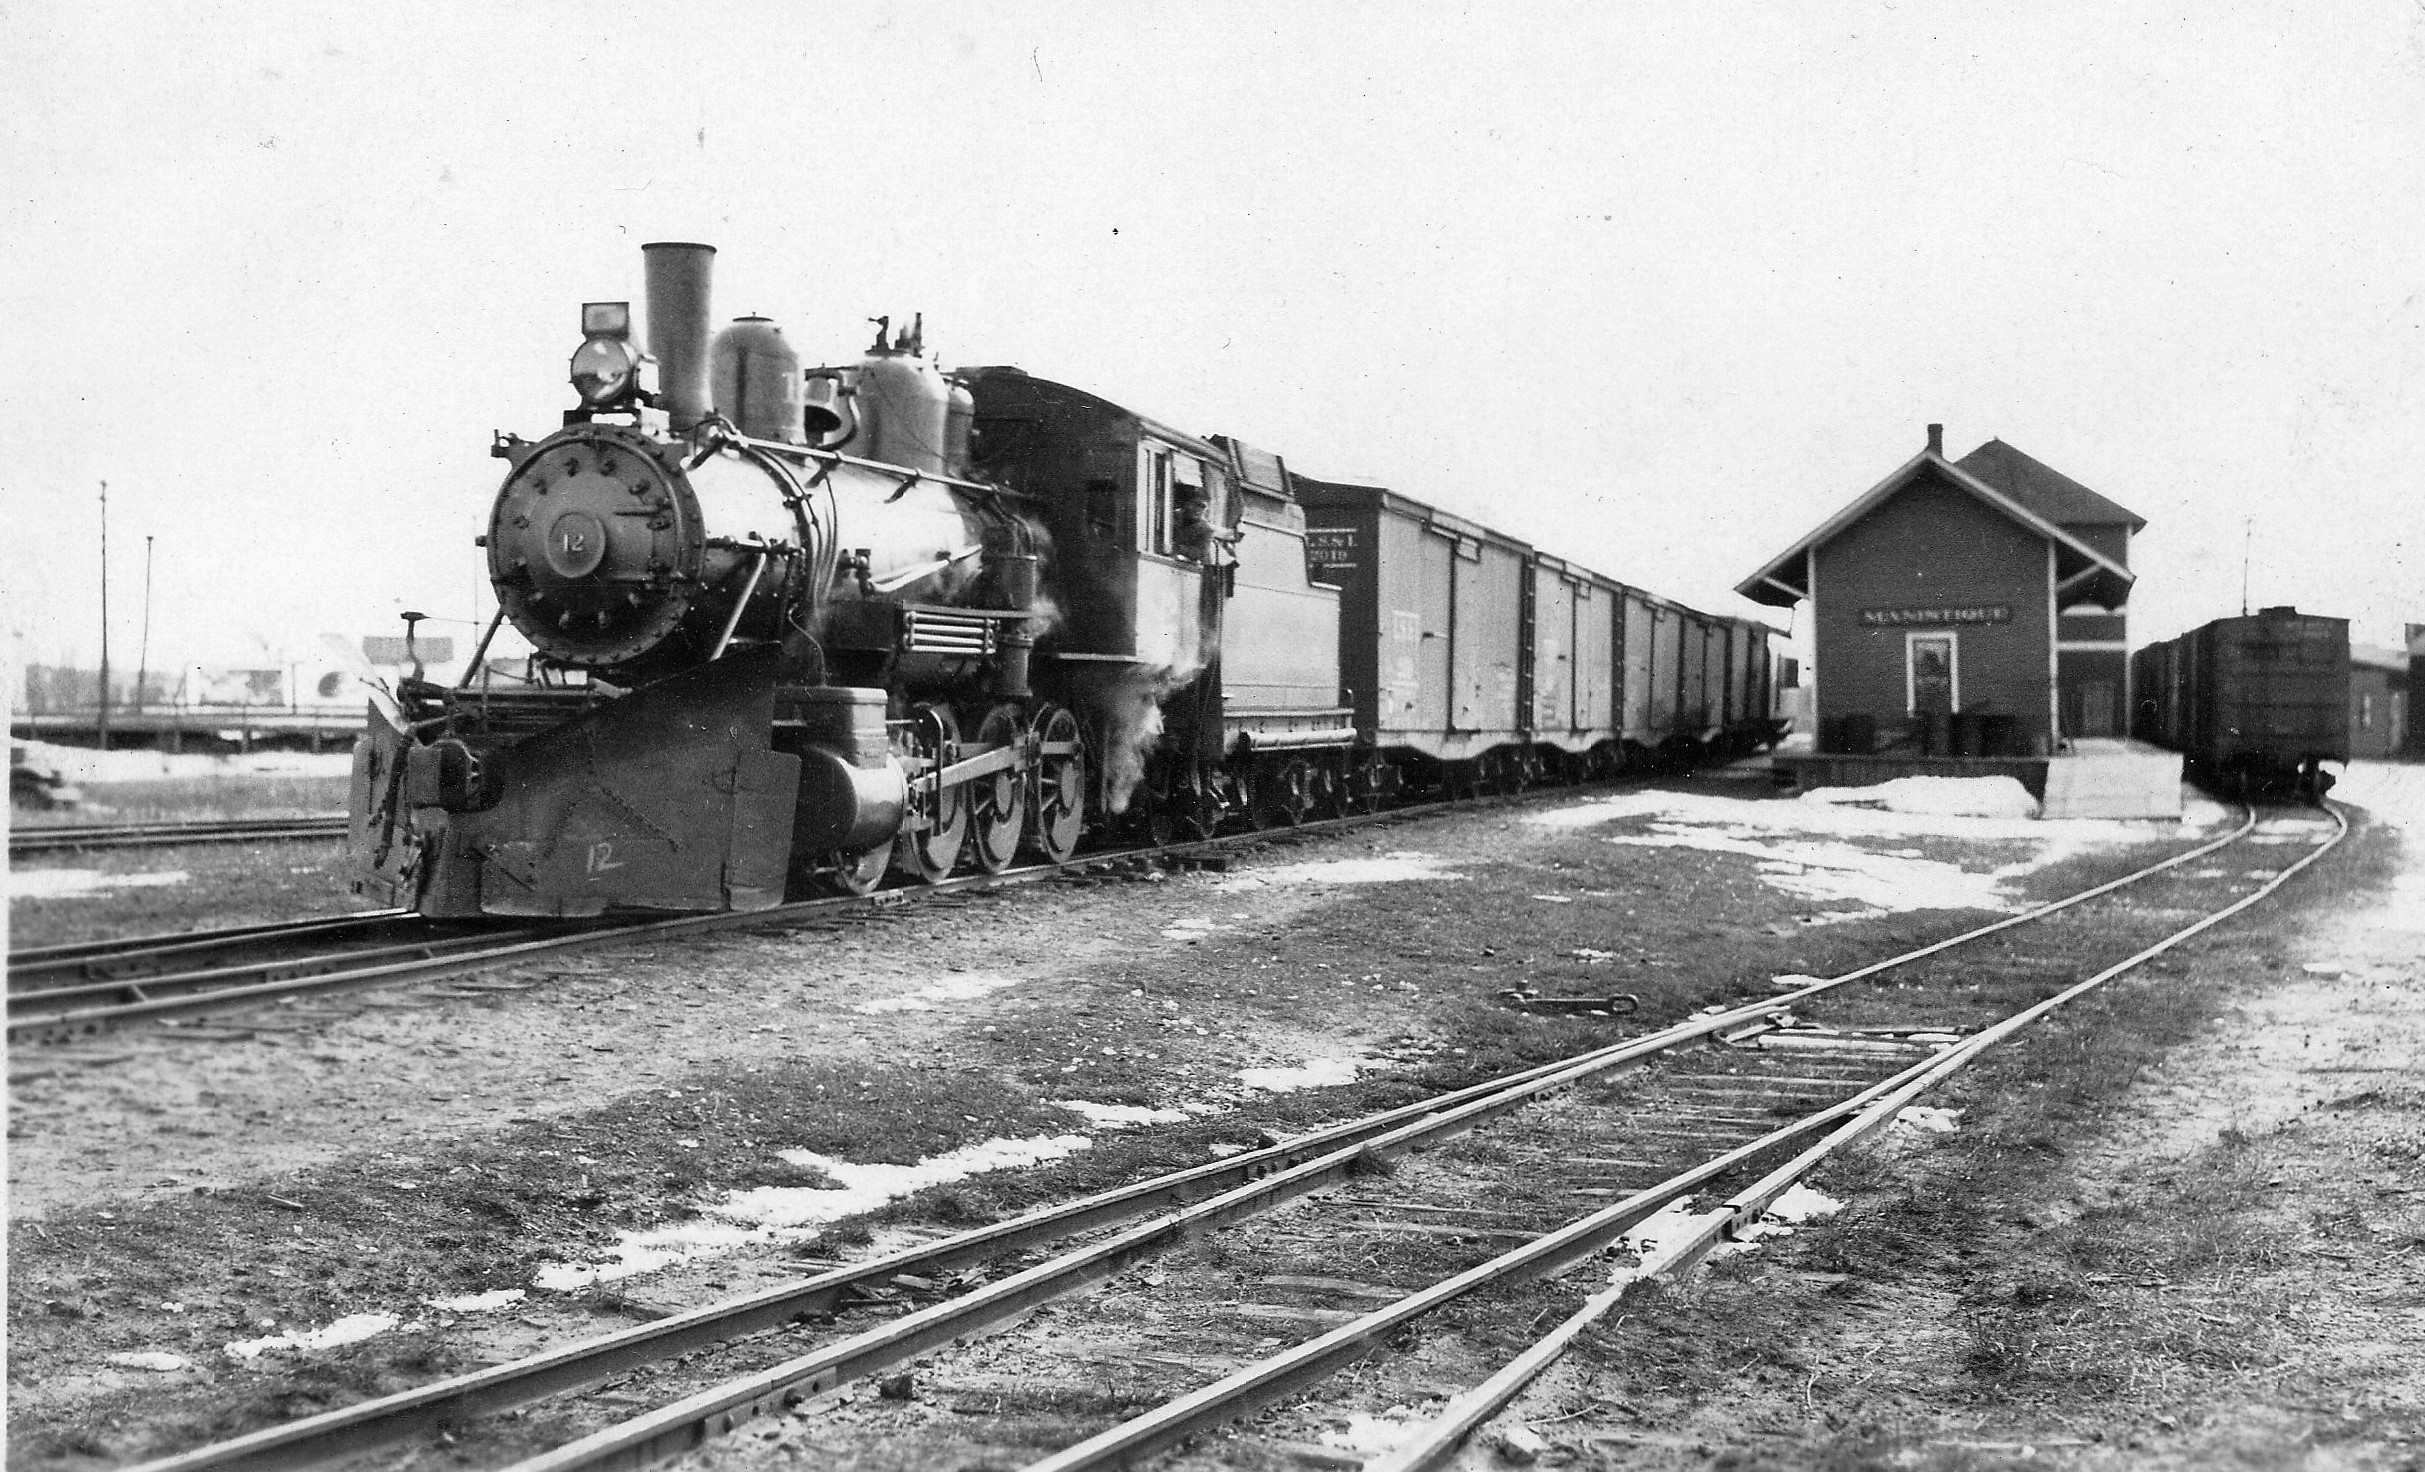 Engine No. 12, March 1932 Image. This locomotive was later renumbered 2370 and was destroyed in the roundhouse fire of 1952.  It was scrapped in 1953. (Niles/Helmka Family Collection)